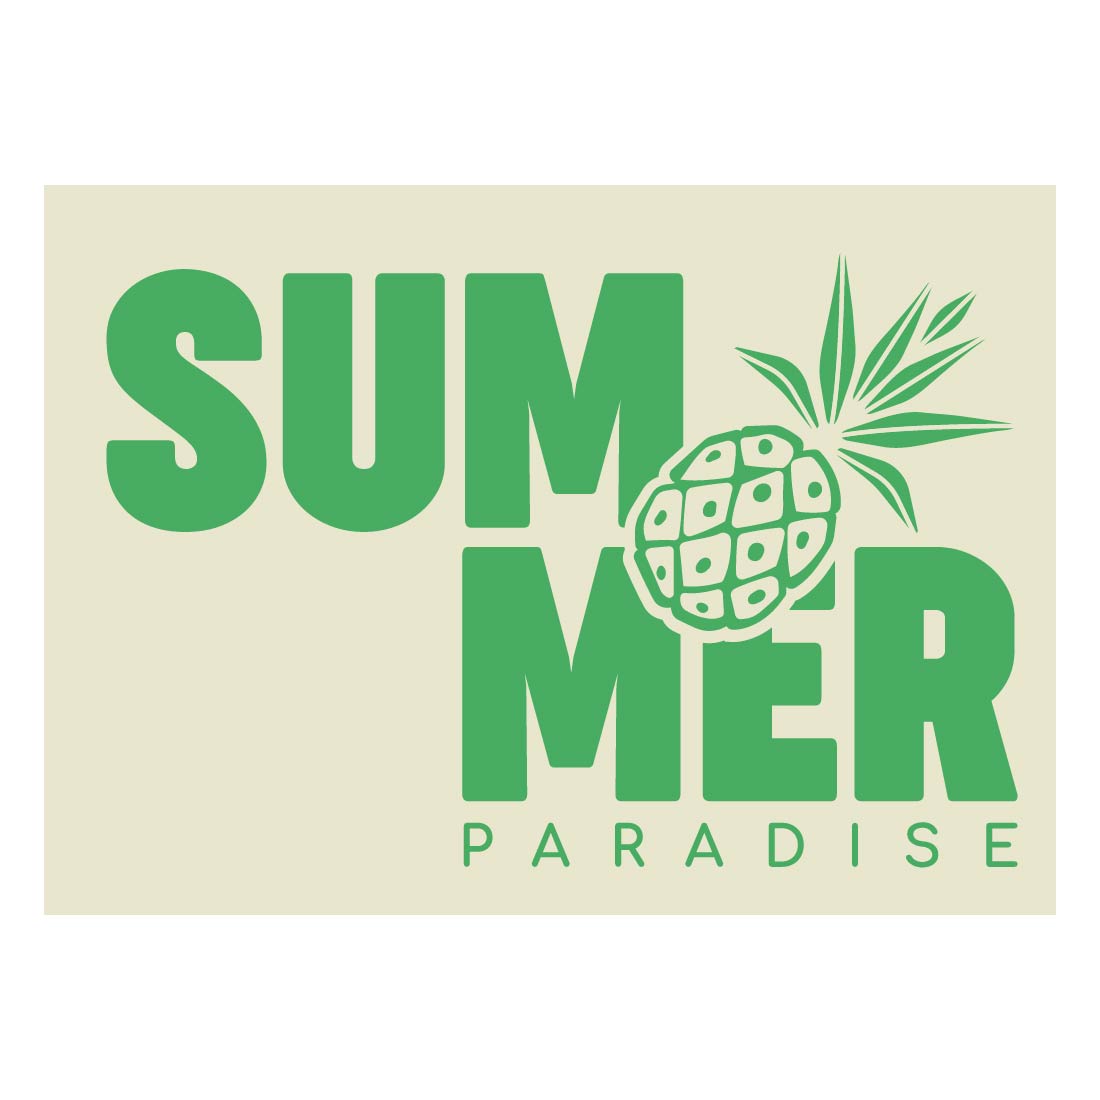 SUMMER PARADISE_T-SHIRT DESIGN REAL SIZE FOR 8 YEARS cover image.